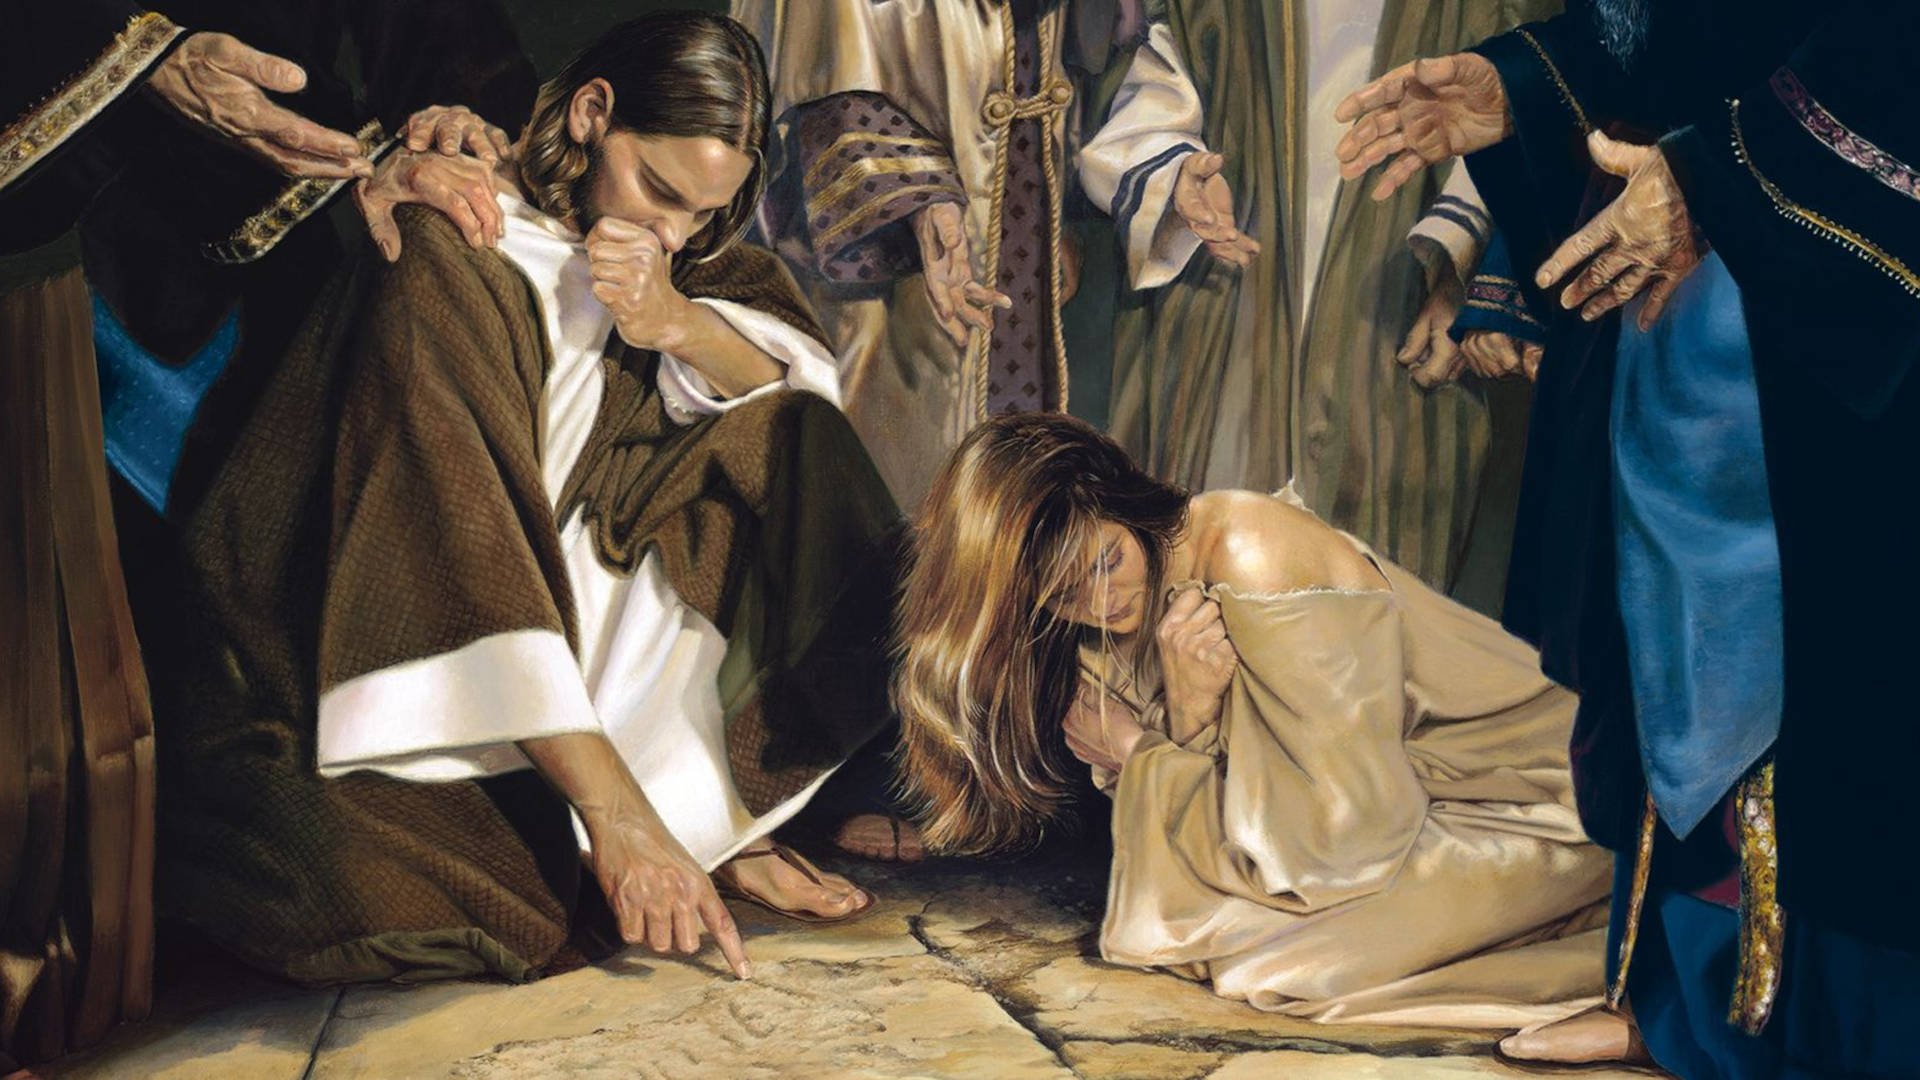 Liz Lemon Swindle's painting, "He that Is Without Sin," depicting Jesus drawing in the dust in front of the woman taken in adultery